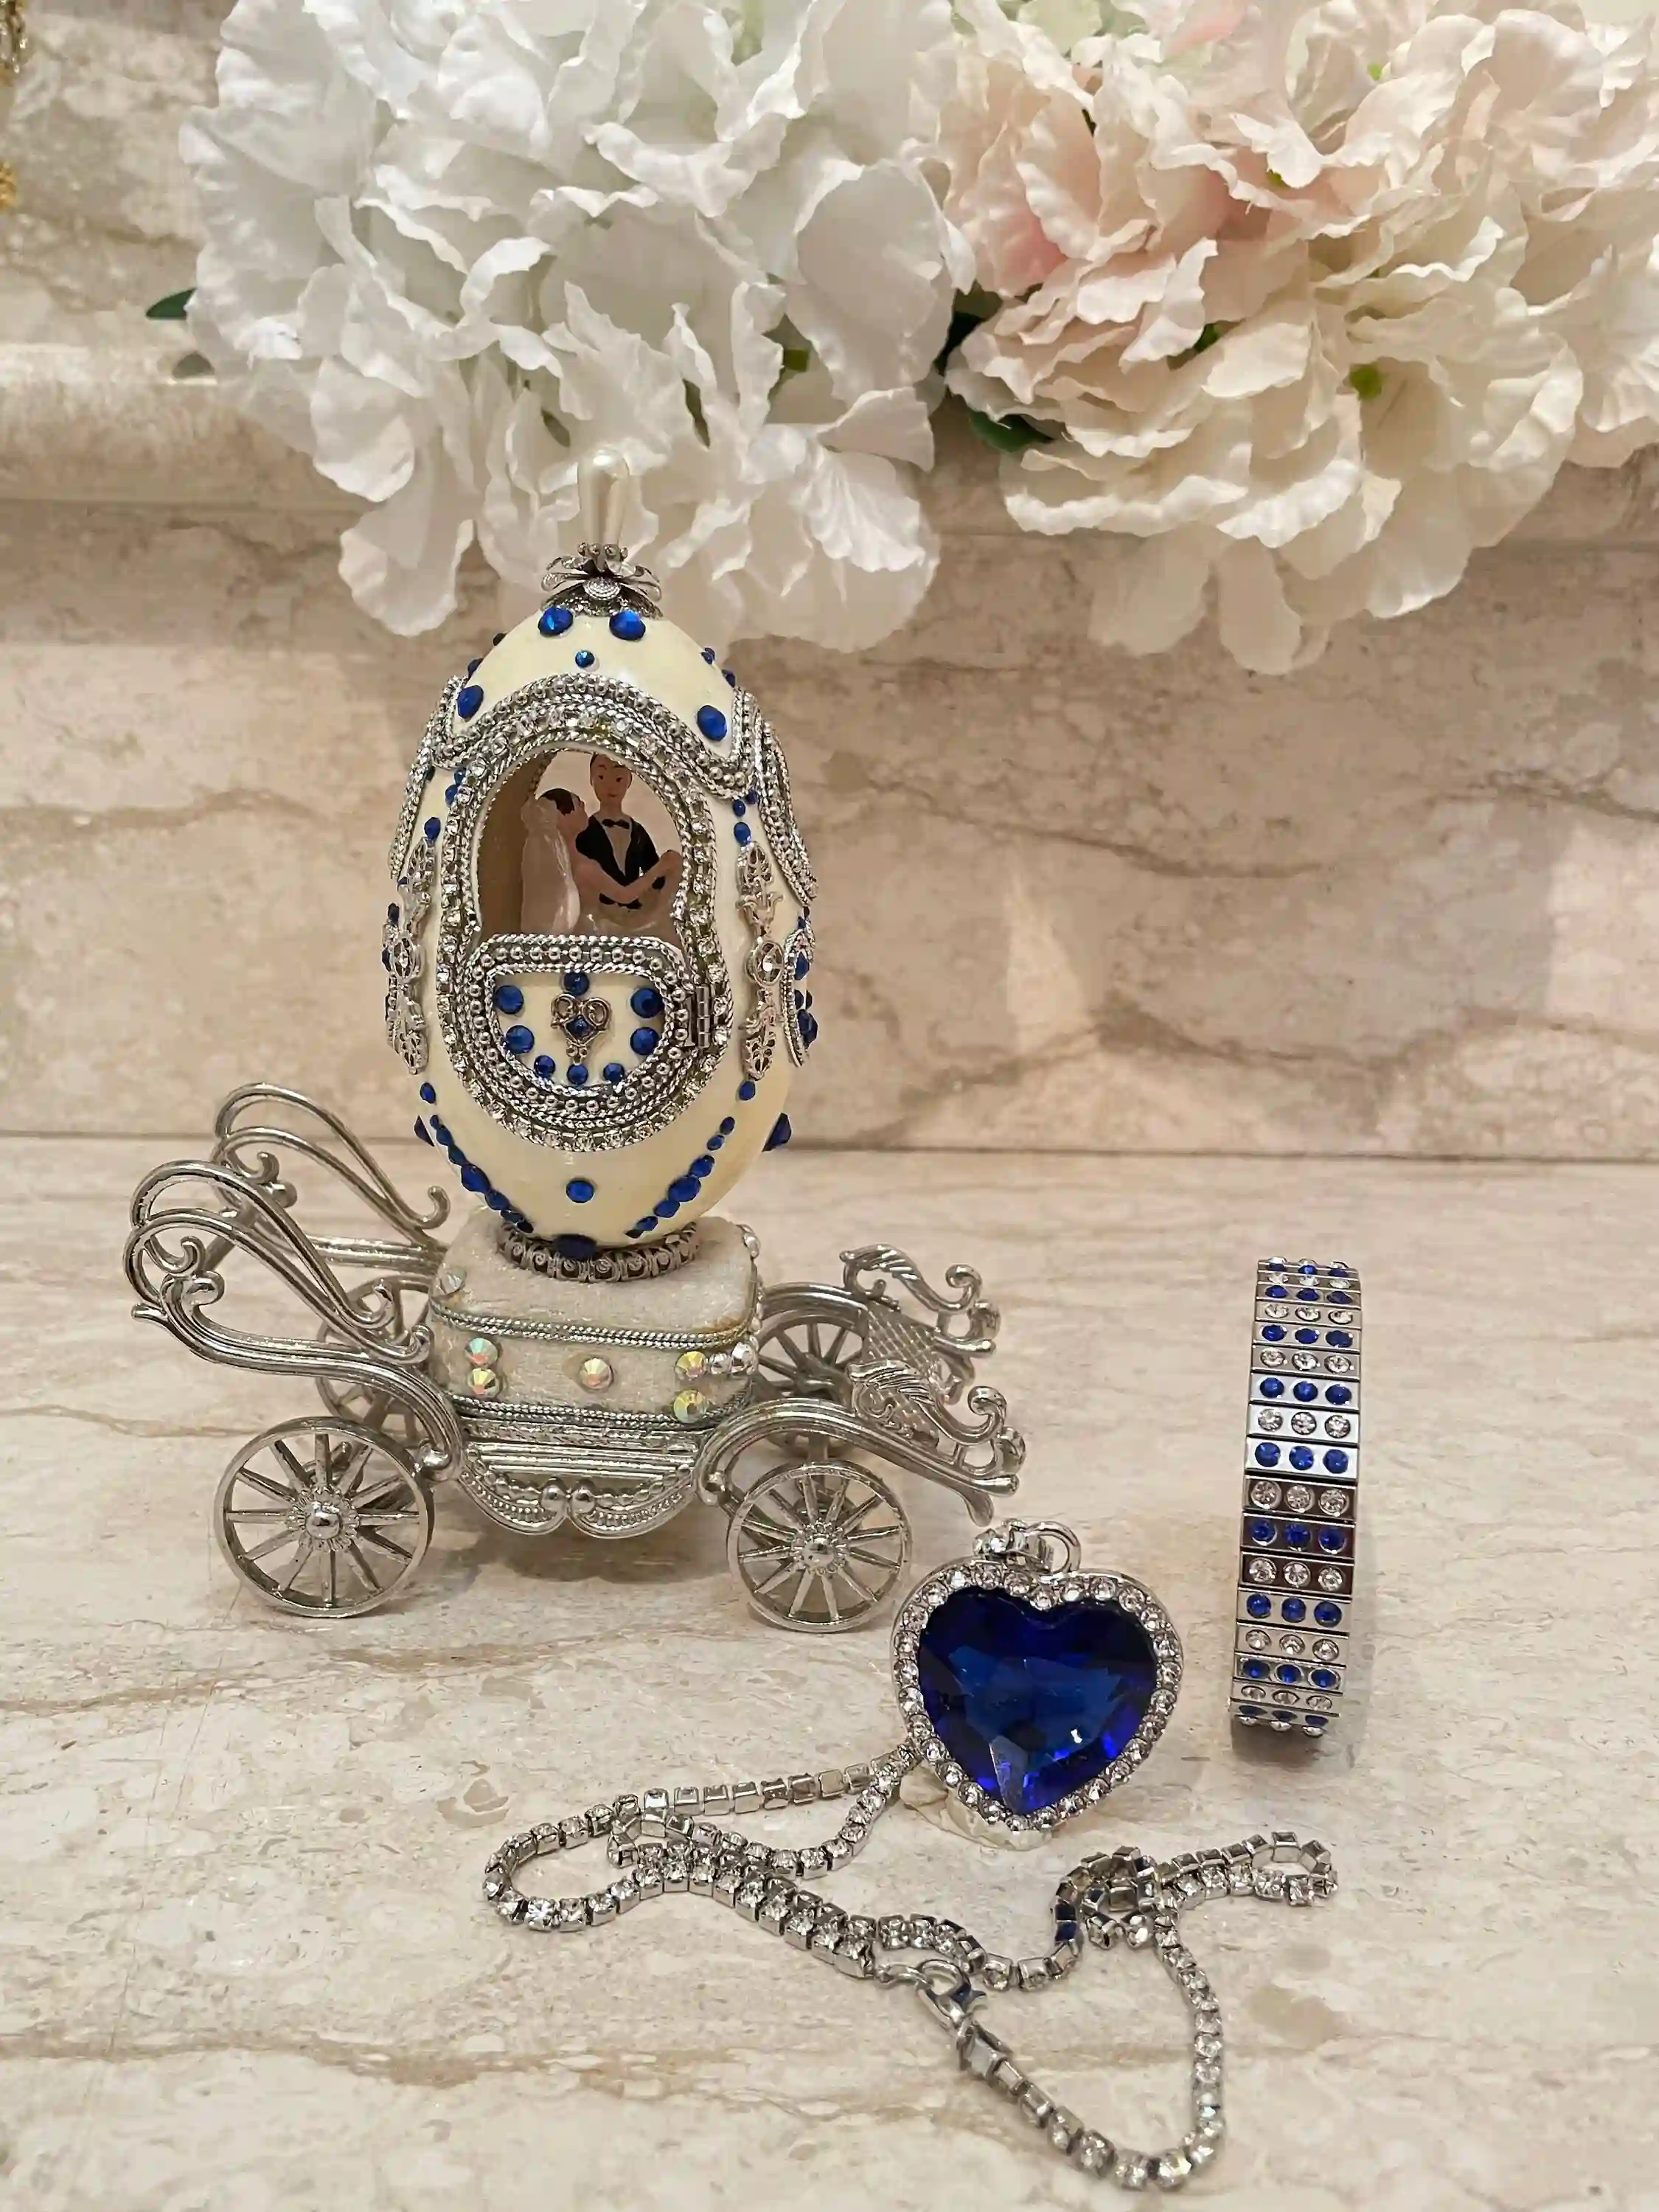 Designer Gifts ONE Of a KIND Faberge Egg Music, Sapphire Gem HANDCARVED Natural Egg , Daughter Wedding Gift From Dad, Wedding Proposal Box 